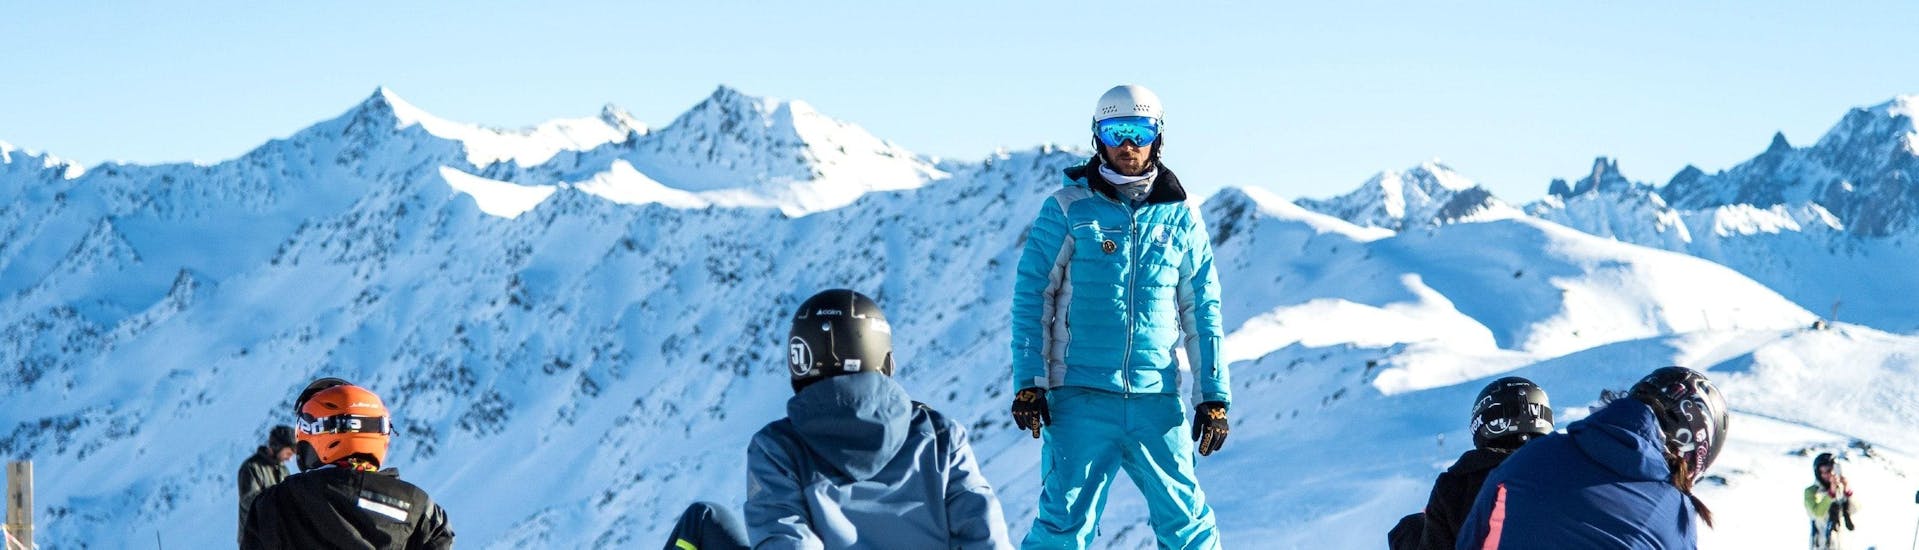 snowboarding-lessons-for-kids-and-adults-adrenaline-verbier-hero